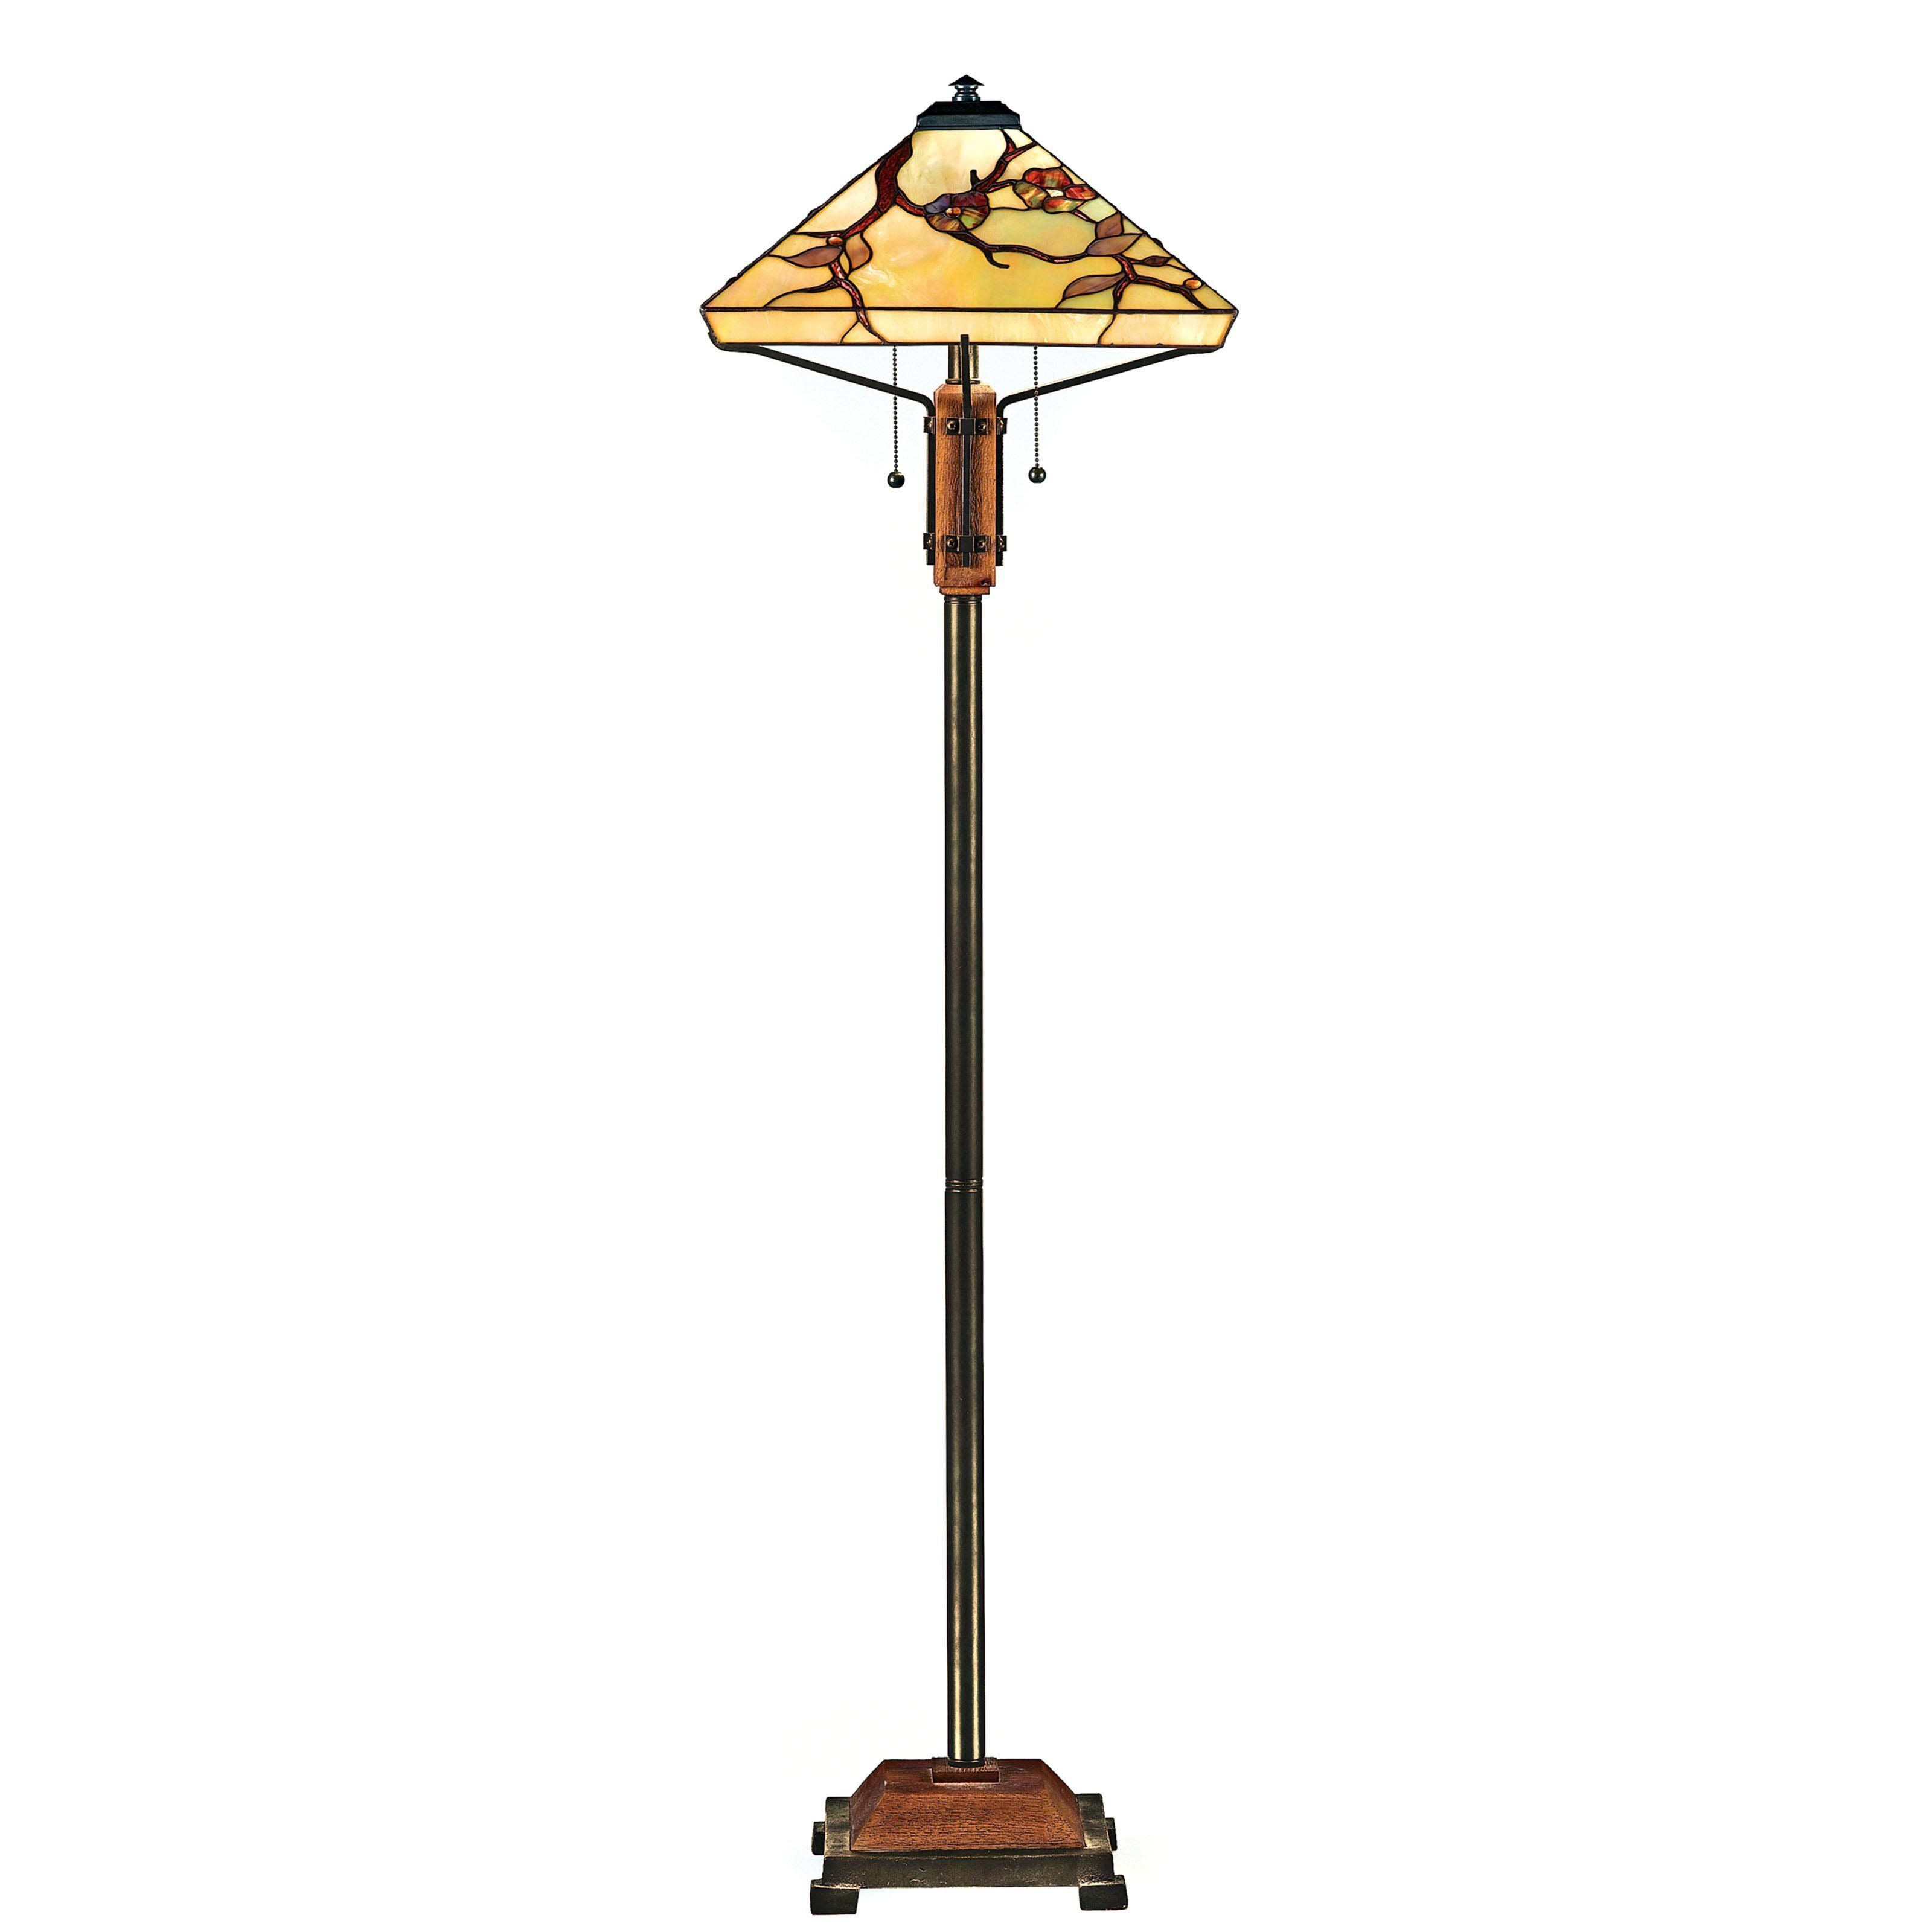 Quoizel Grove Park Tf9404m Tiffany Floor Lamp Tf9404m pertaining to proportions 3200 X 3200